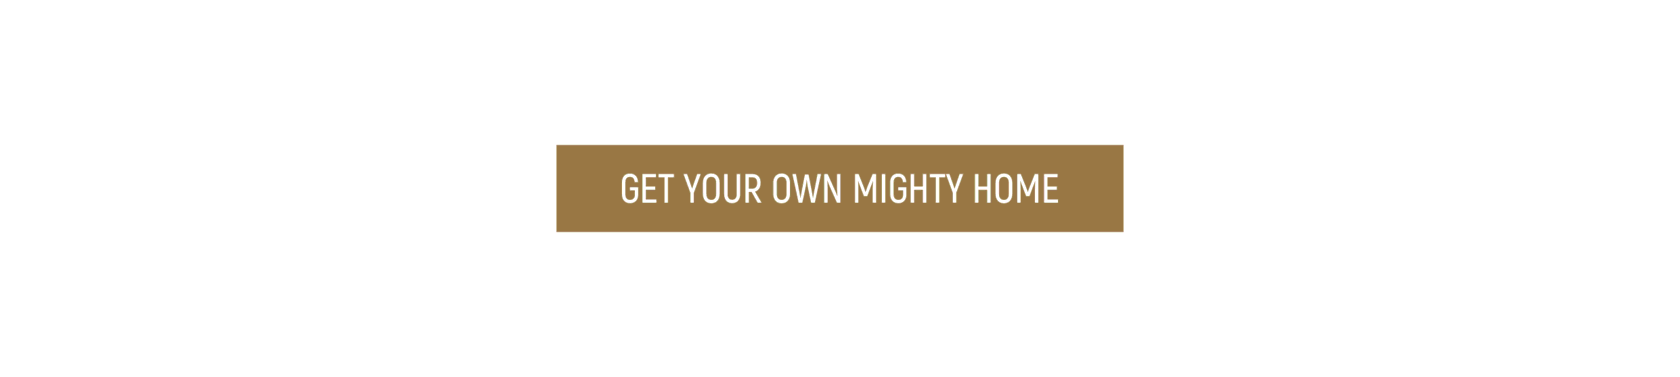 GET YOUR OWN MIGHTY HOME